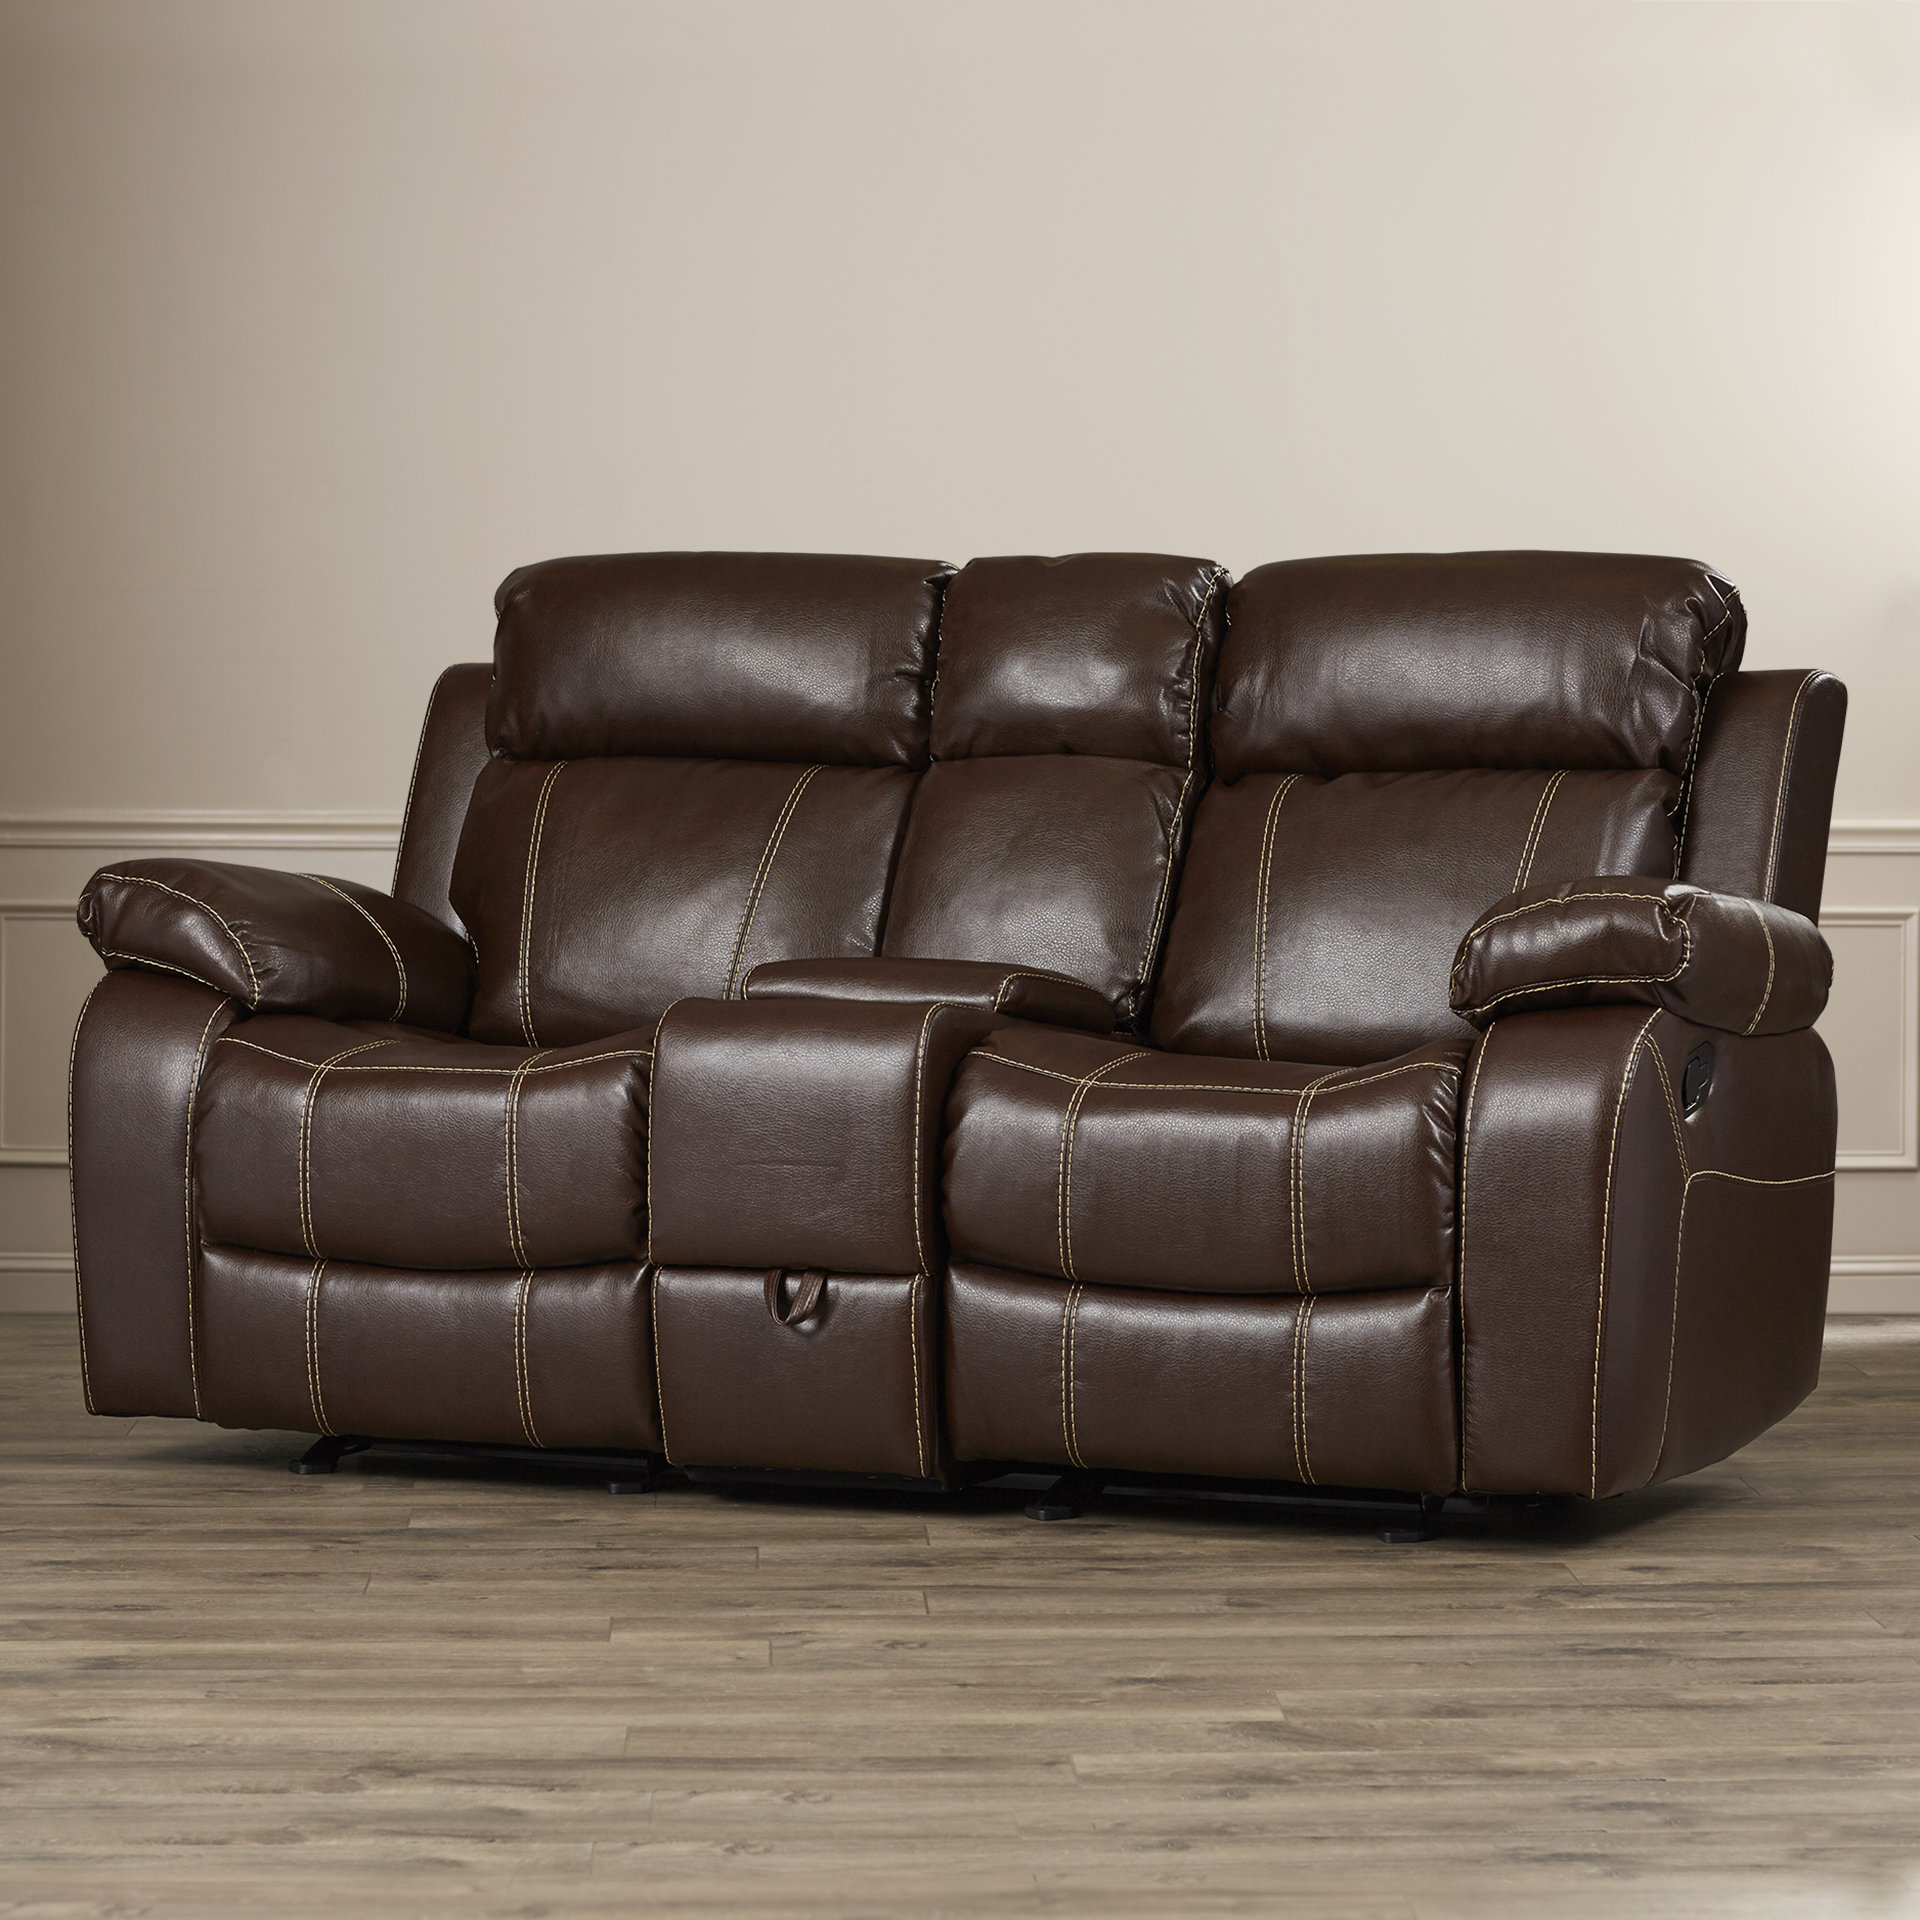 Tuthill 78” Faux Leather Pillow Top Arm Reclining Loveseat